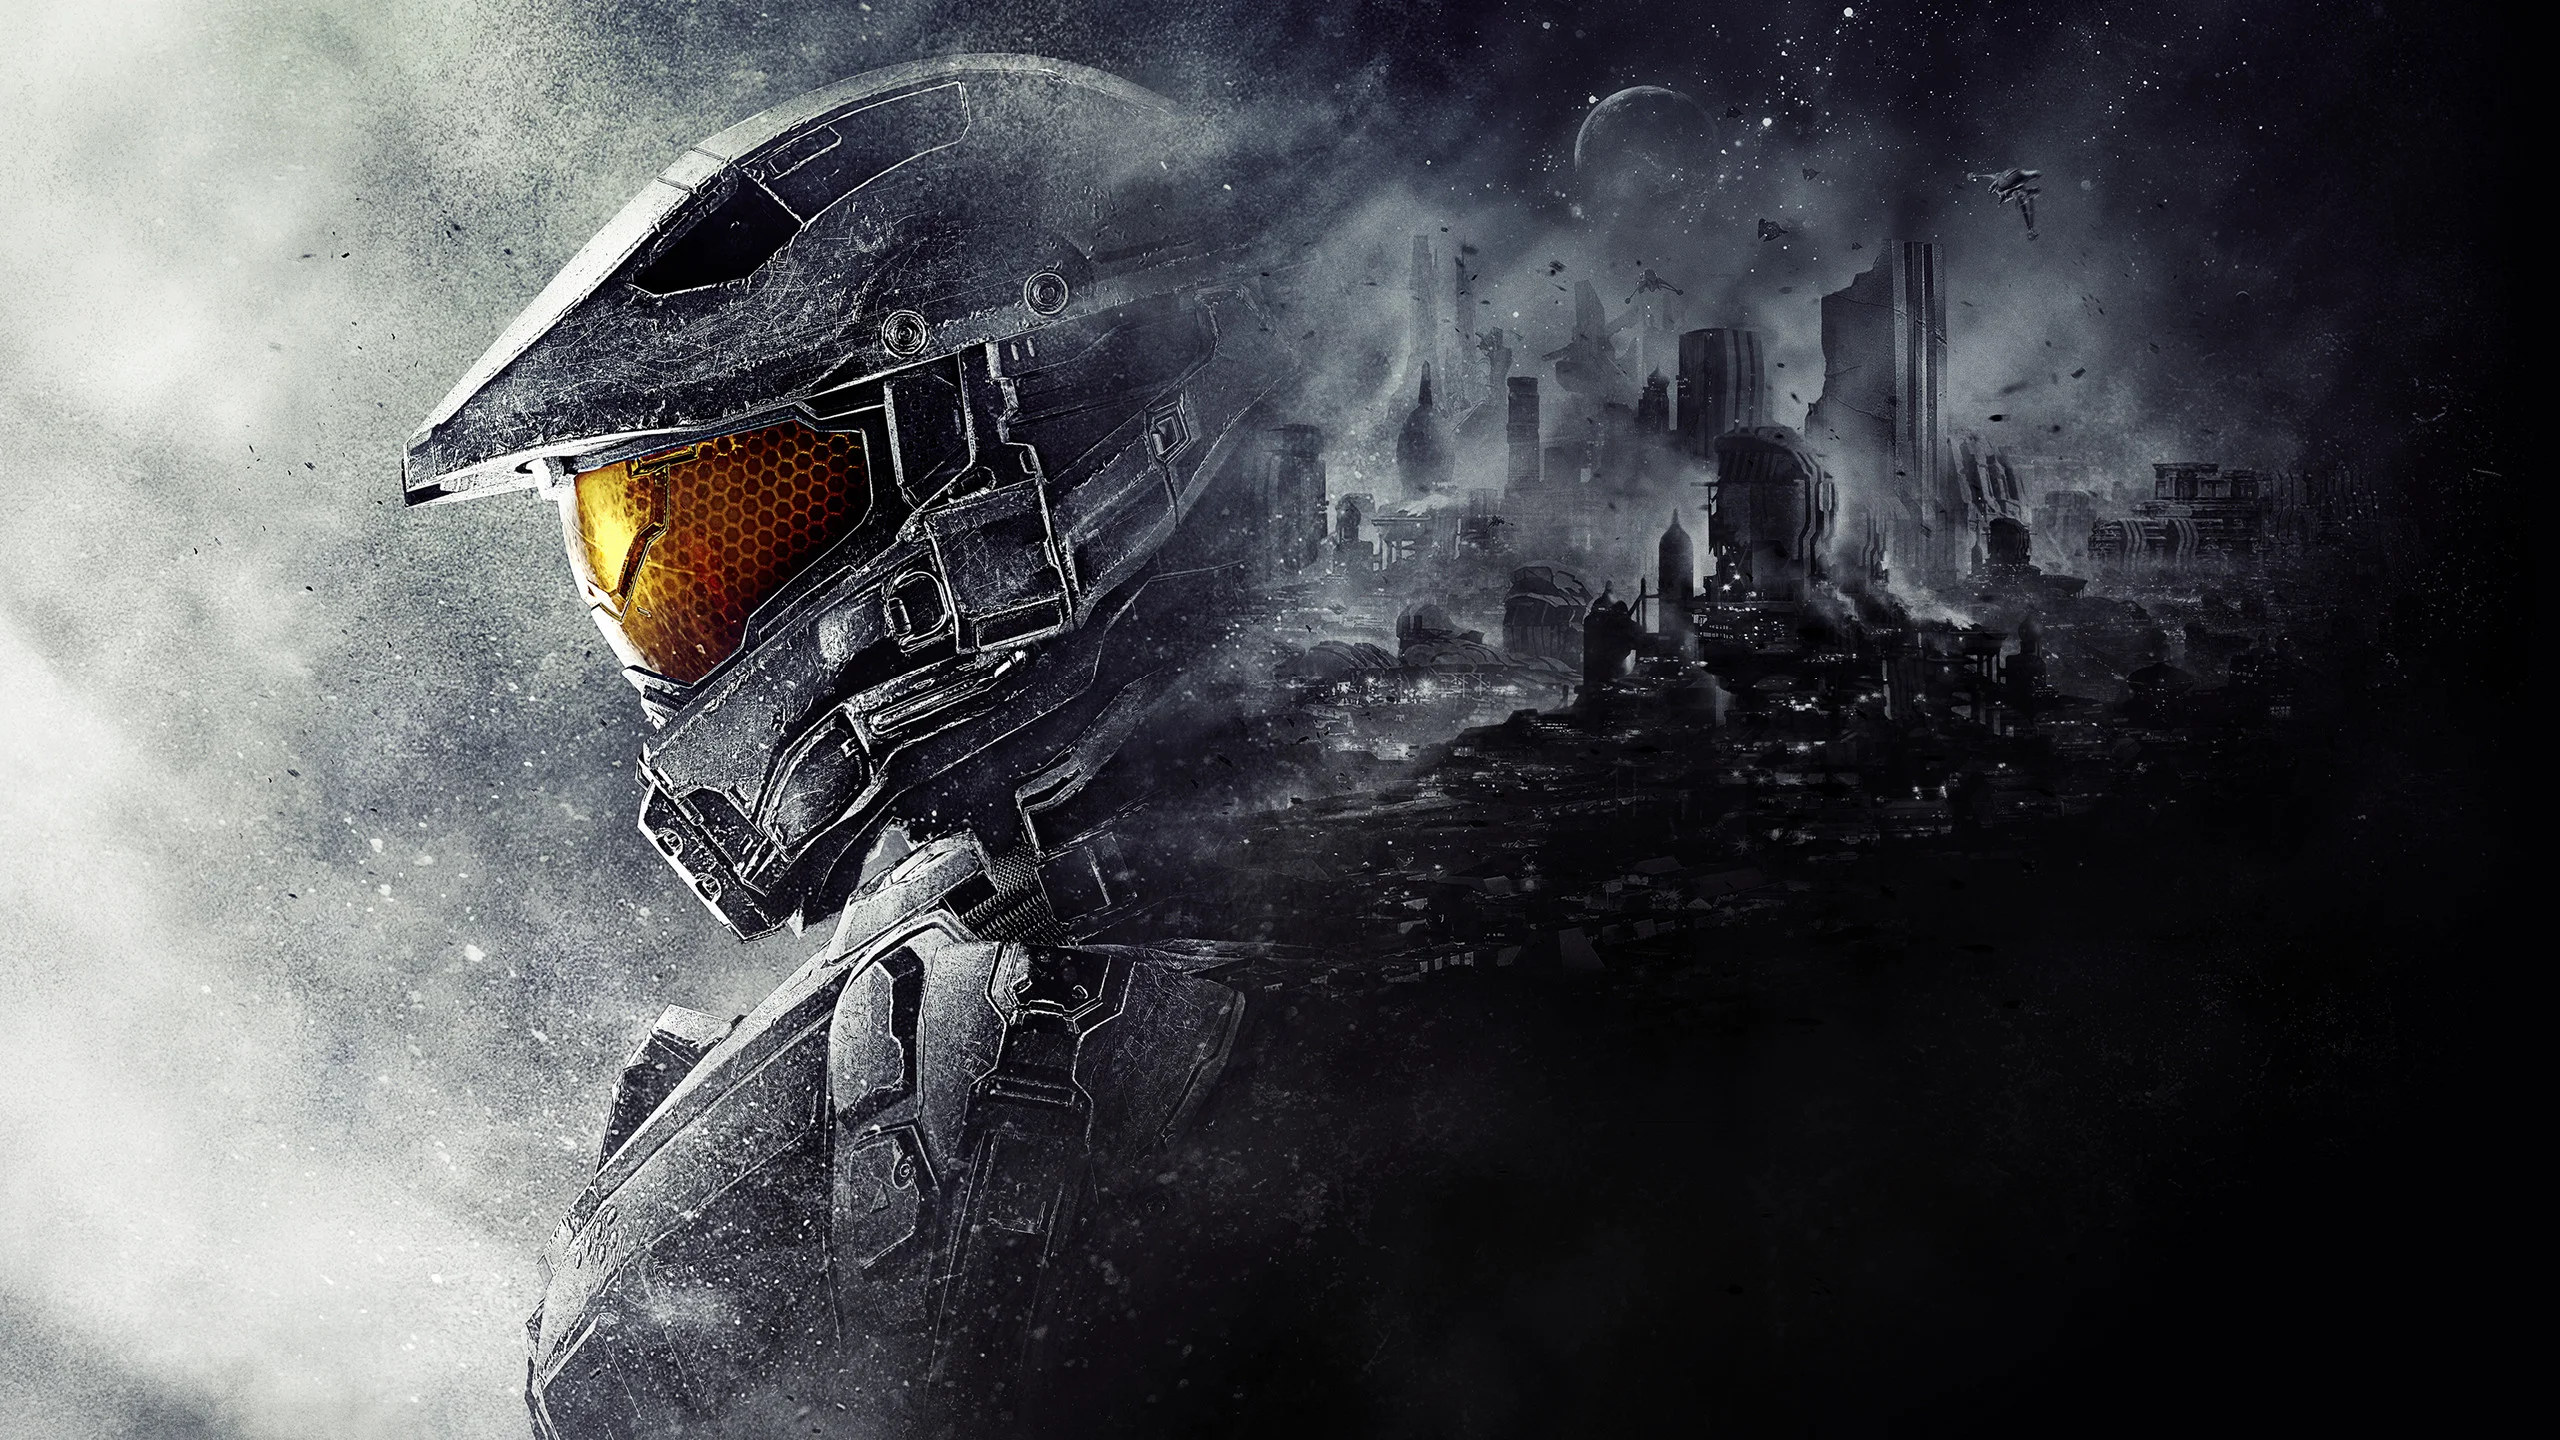 Master Chief Halo 5 Guardians Wallpapers | HD Wallpapers